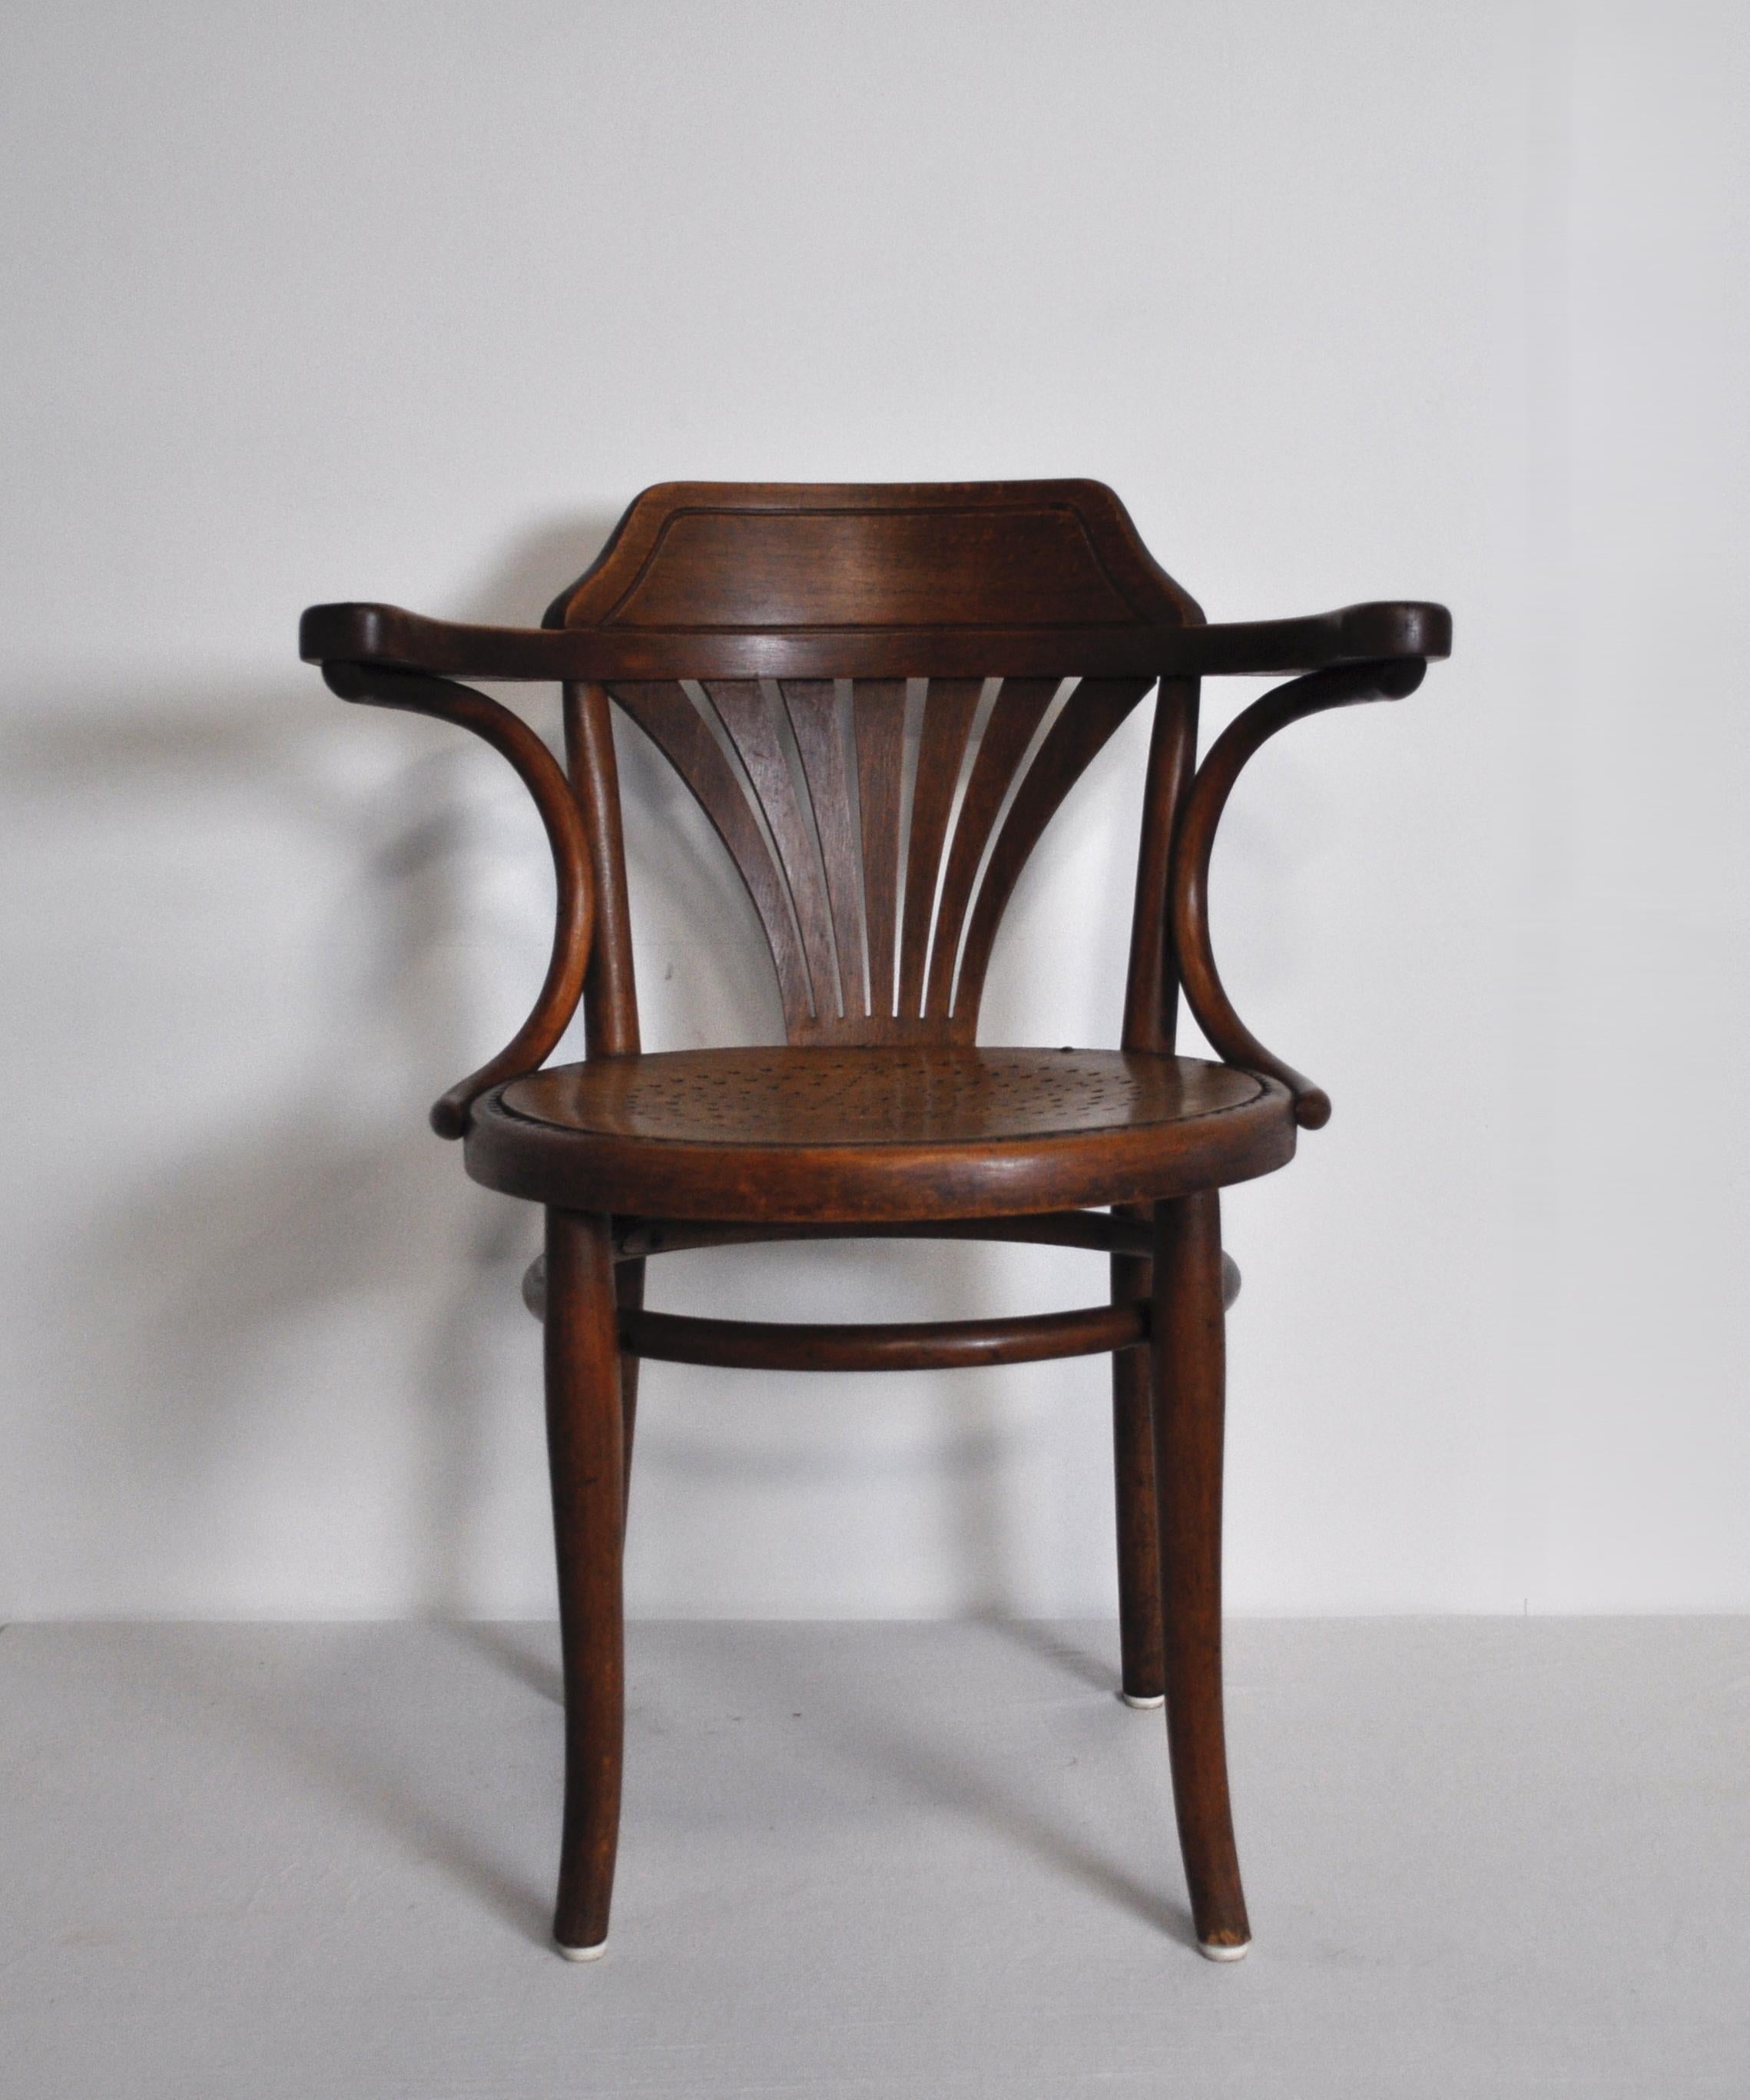 A rare early model nr. 233 Bentwood Armchair manufactured by Thonet in Austria. Marked with paper label and stamp (second generation produced after 1881). The back and armrests are harmonically integrated, providing stability and comfort. Newer seat